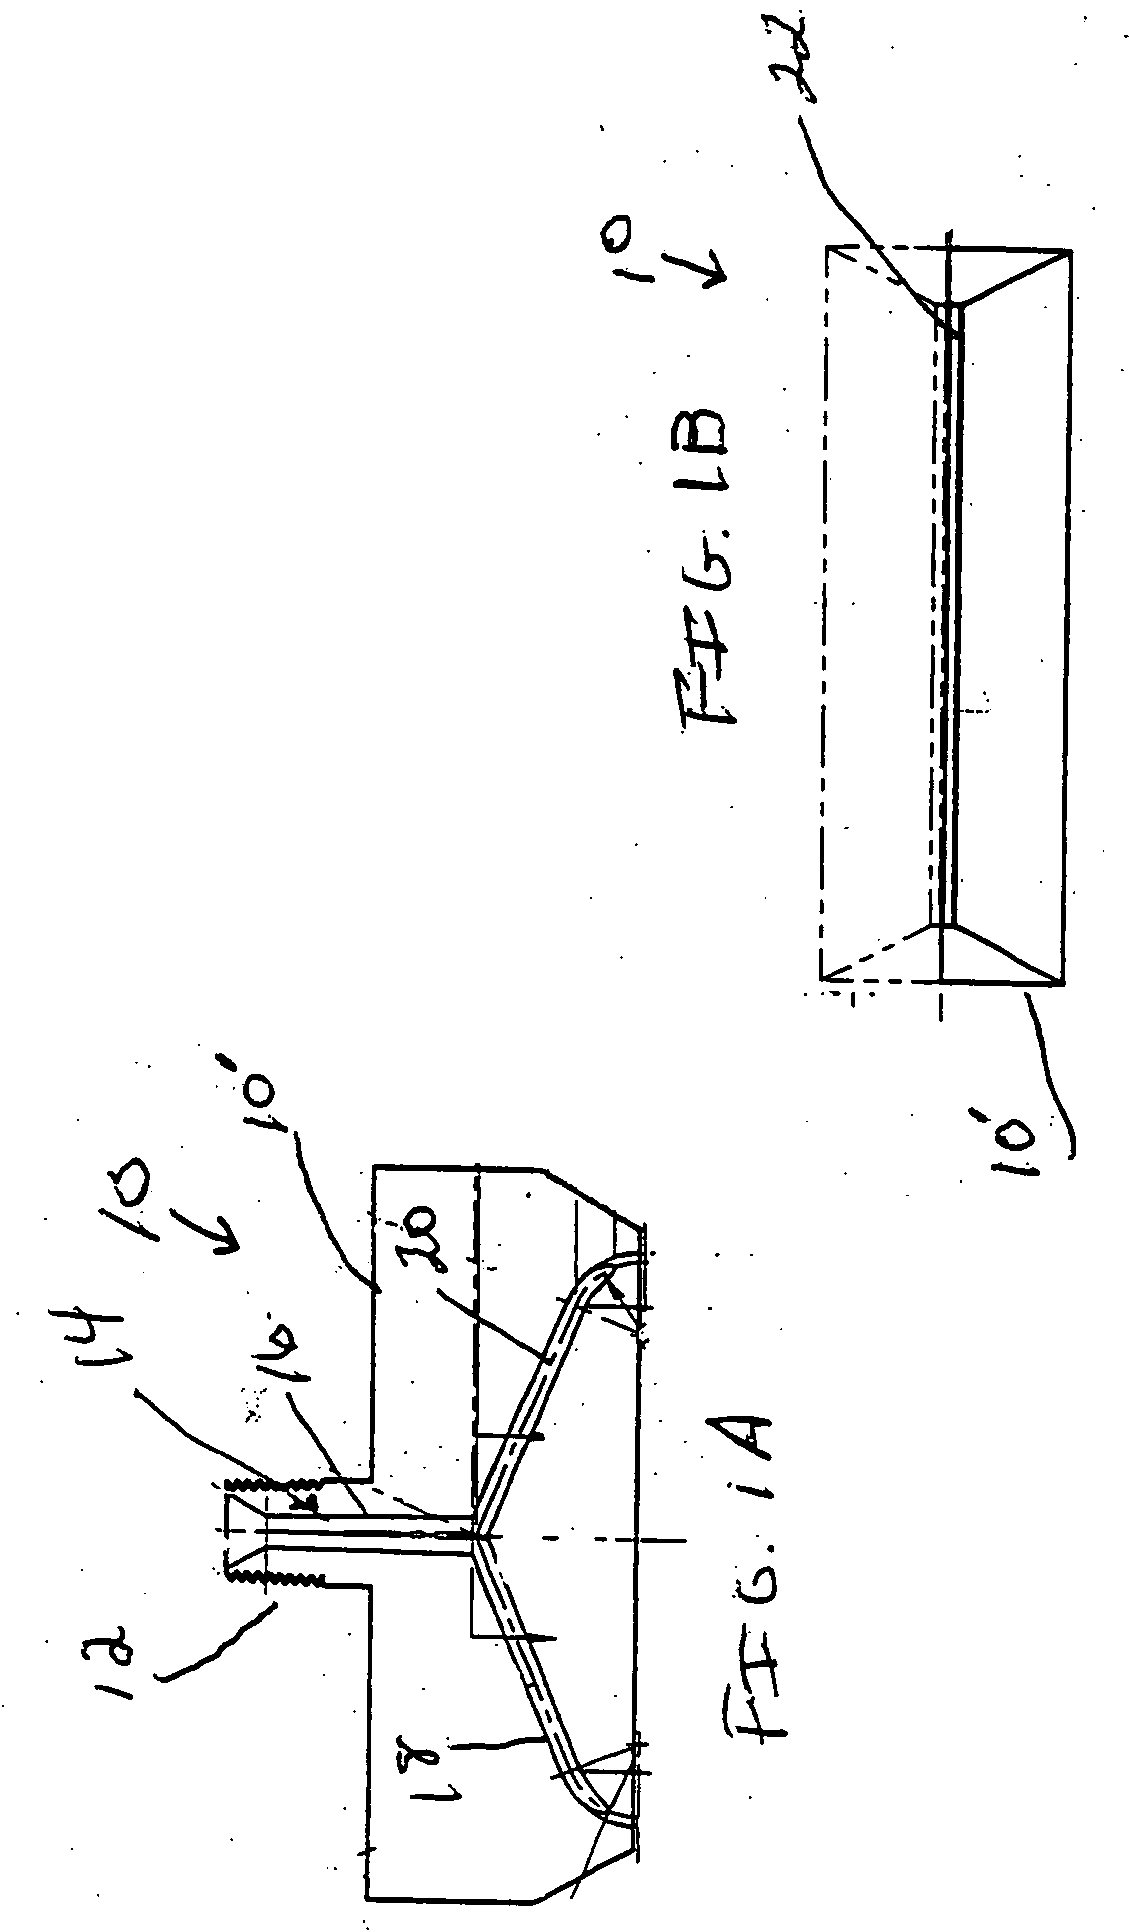 Nozzle for use in rotational casting apparatus